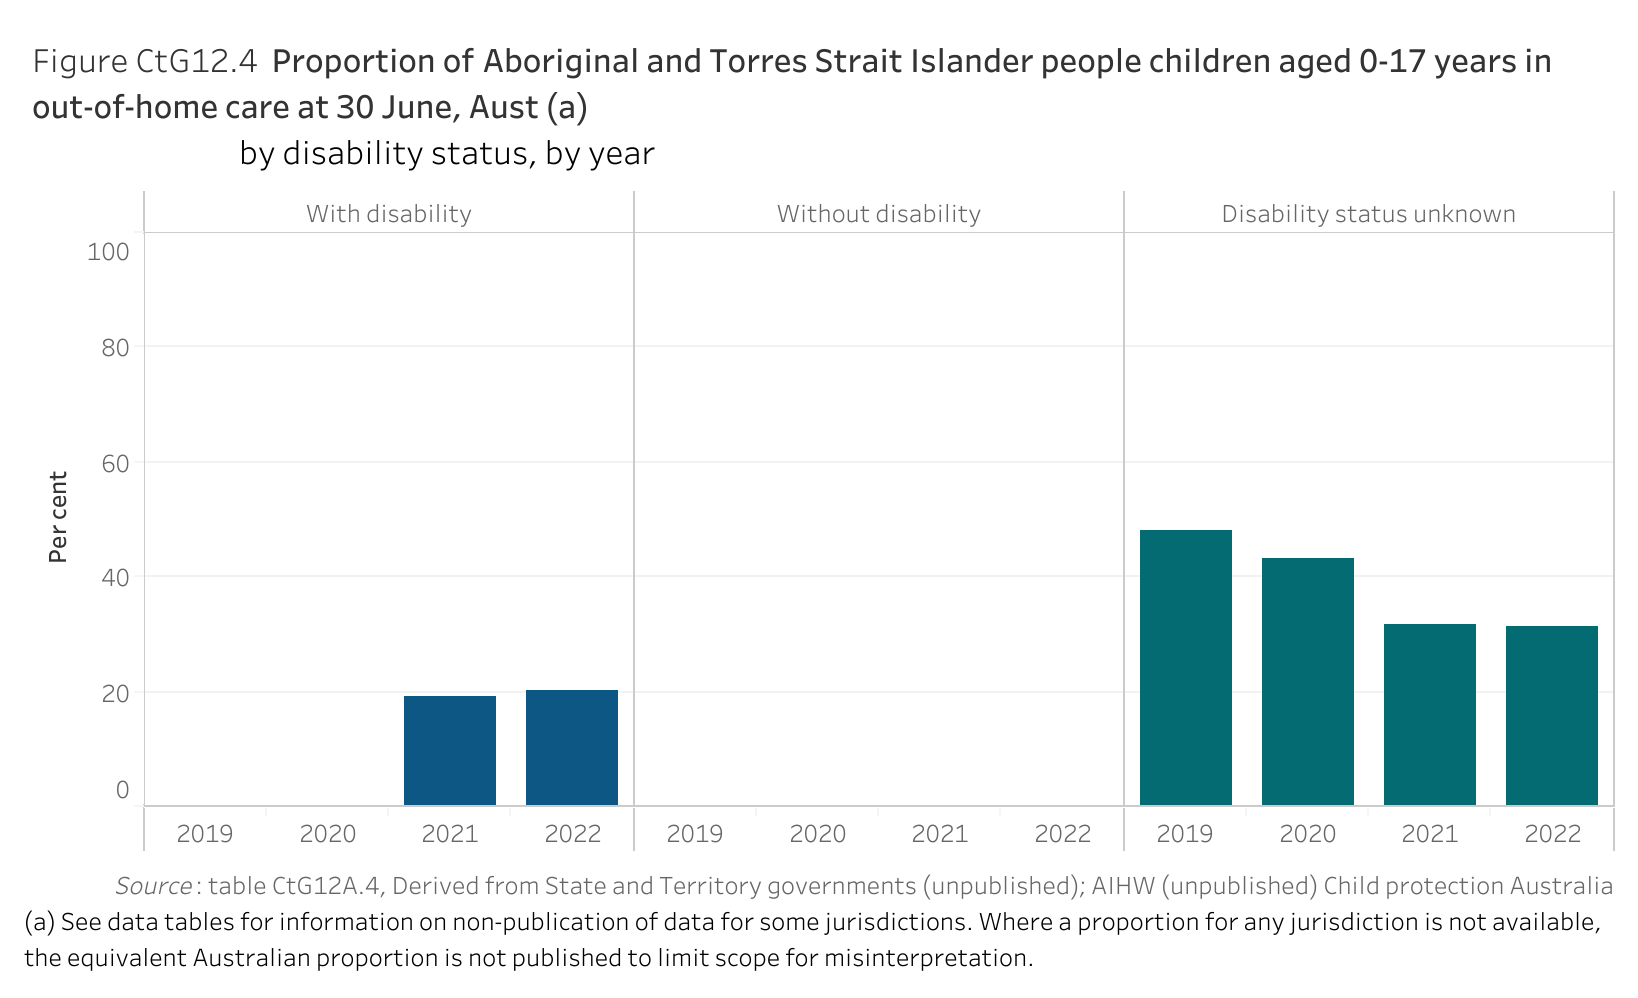 Figure CtG12.4 shows the proportion of Aboriginal and Torres Strait Islander people children aged 0-17 years in out-of-home care at 30 June, Australia, by disability status, by year. More details can be found within the text near this image.